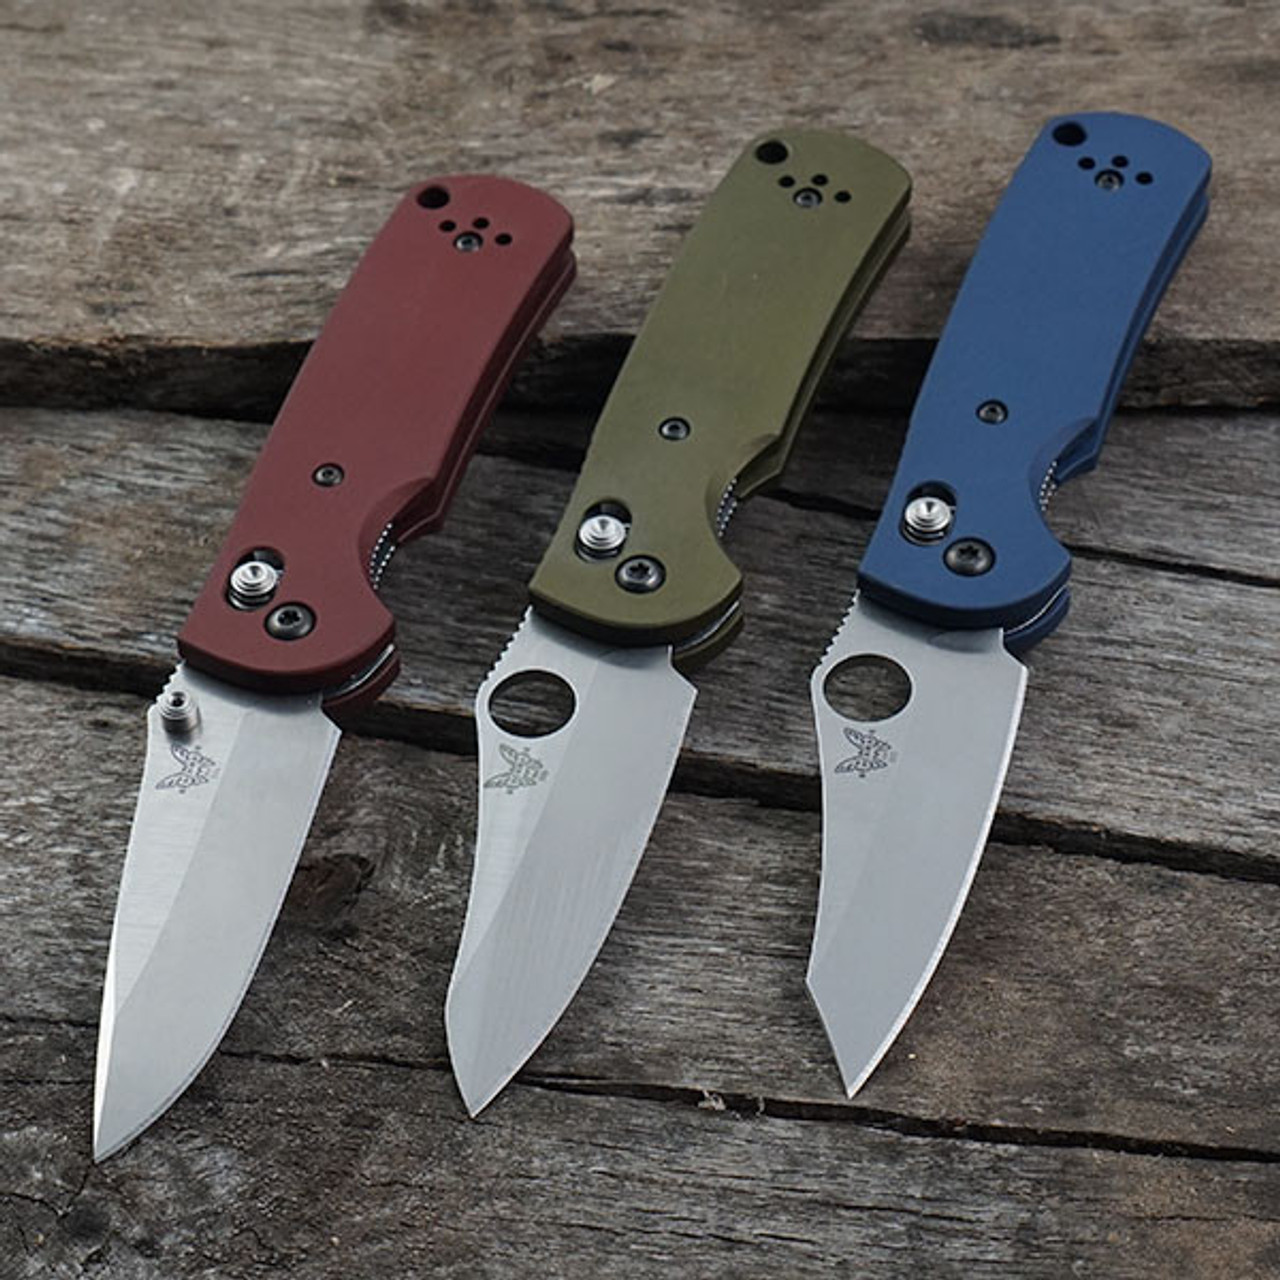 Benchmade Dresses Up Mini Grip with New Premium Configuration »